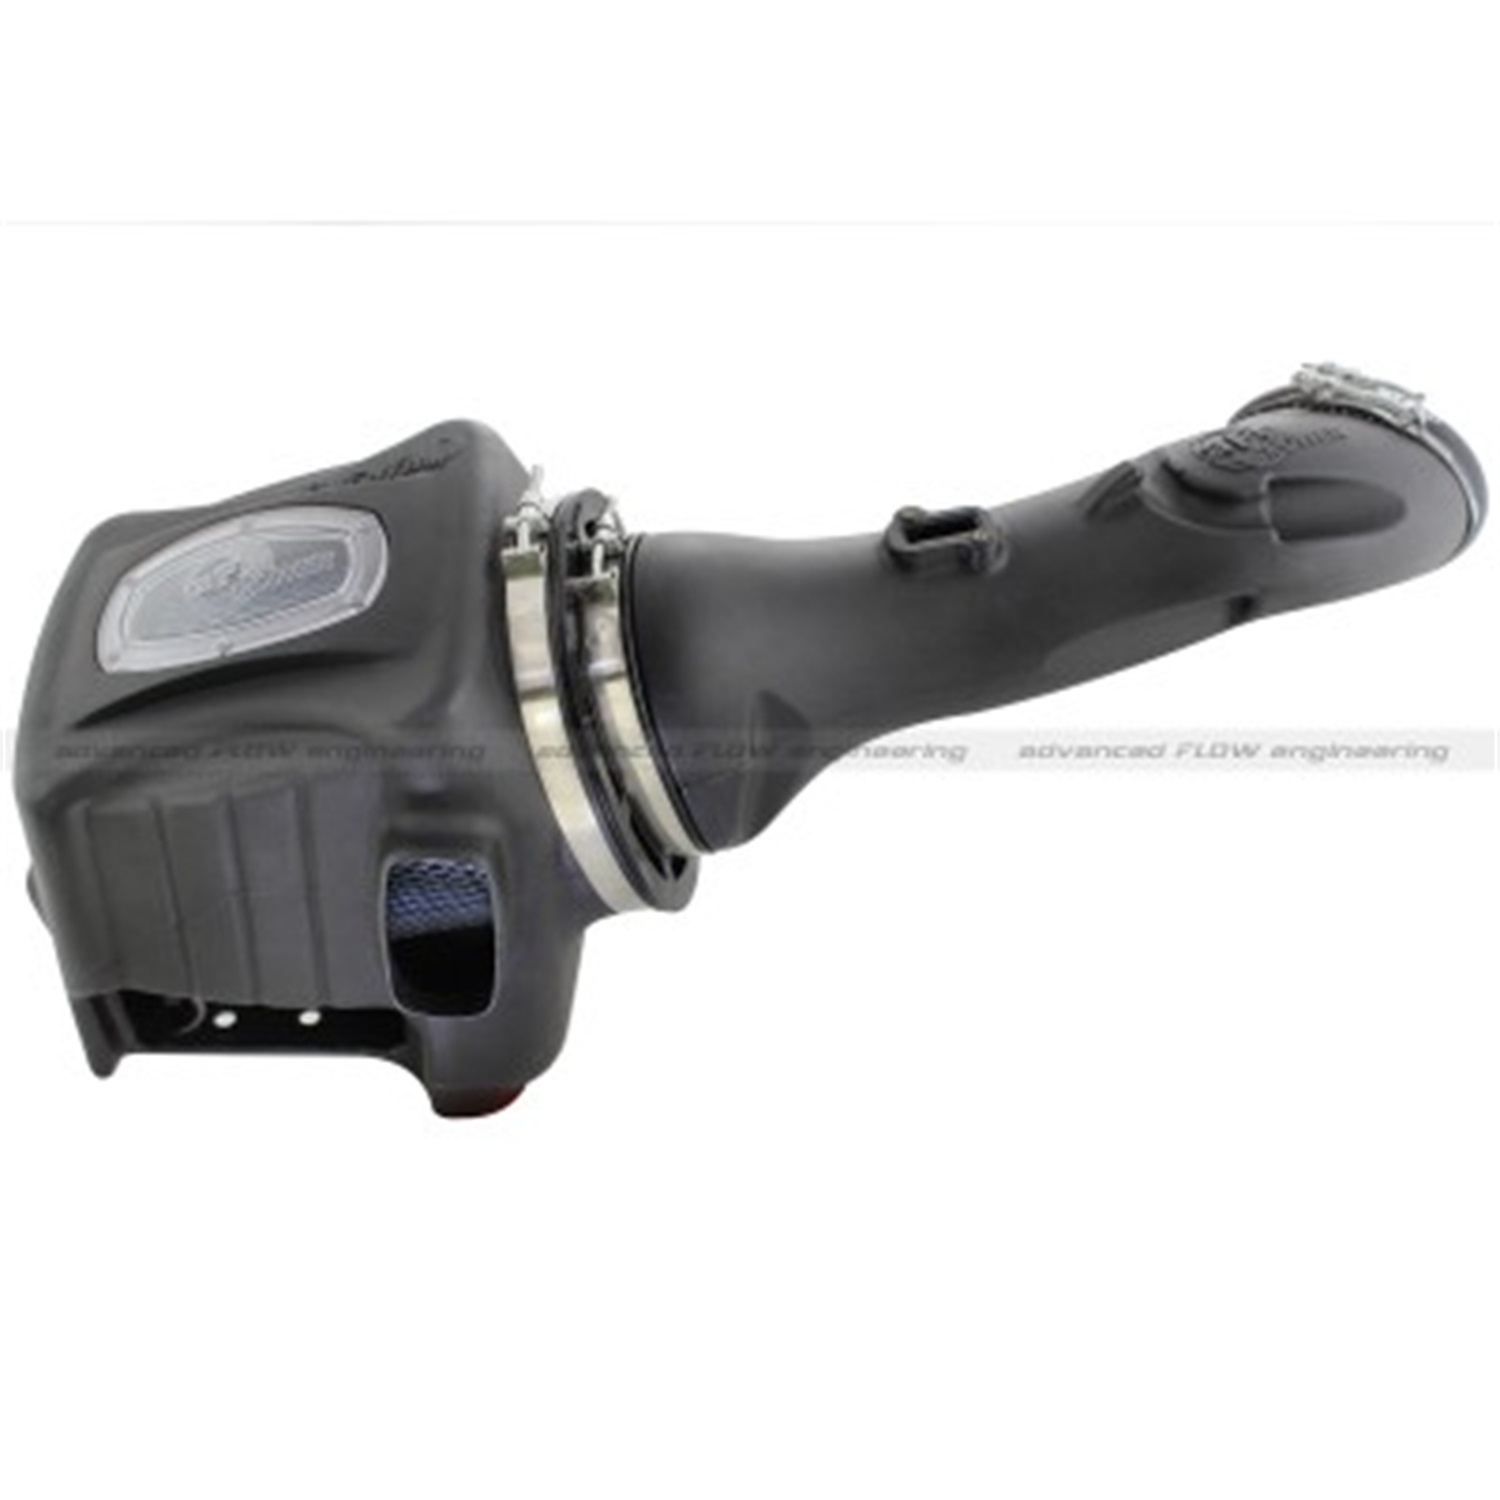 aFe Power aFe Power 50-73005 Momentum HD PRO 10R Stage 2 Si Intake System